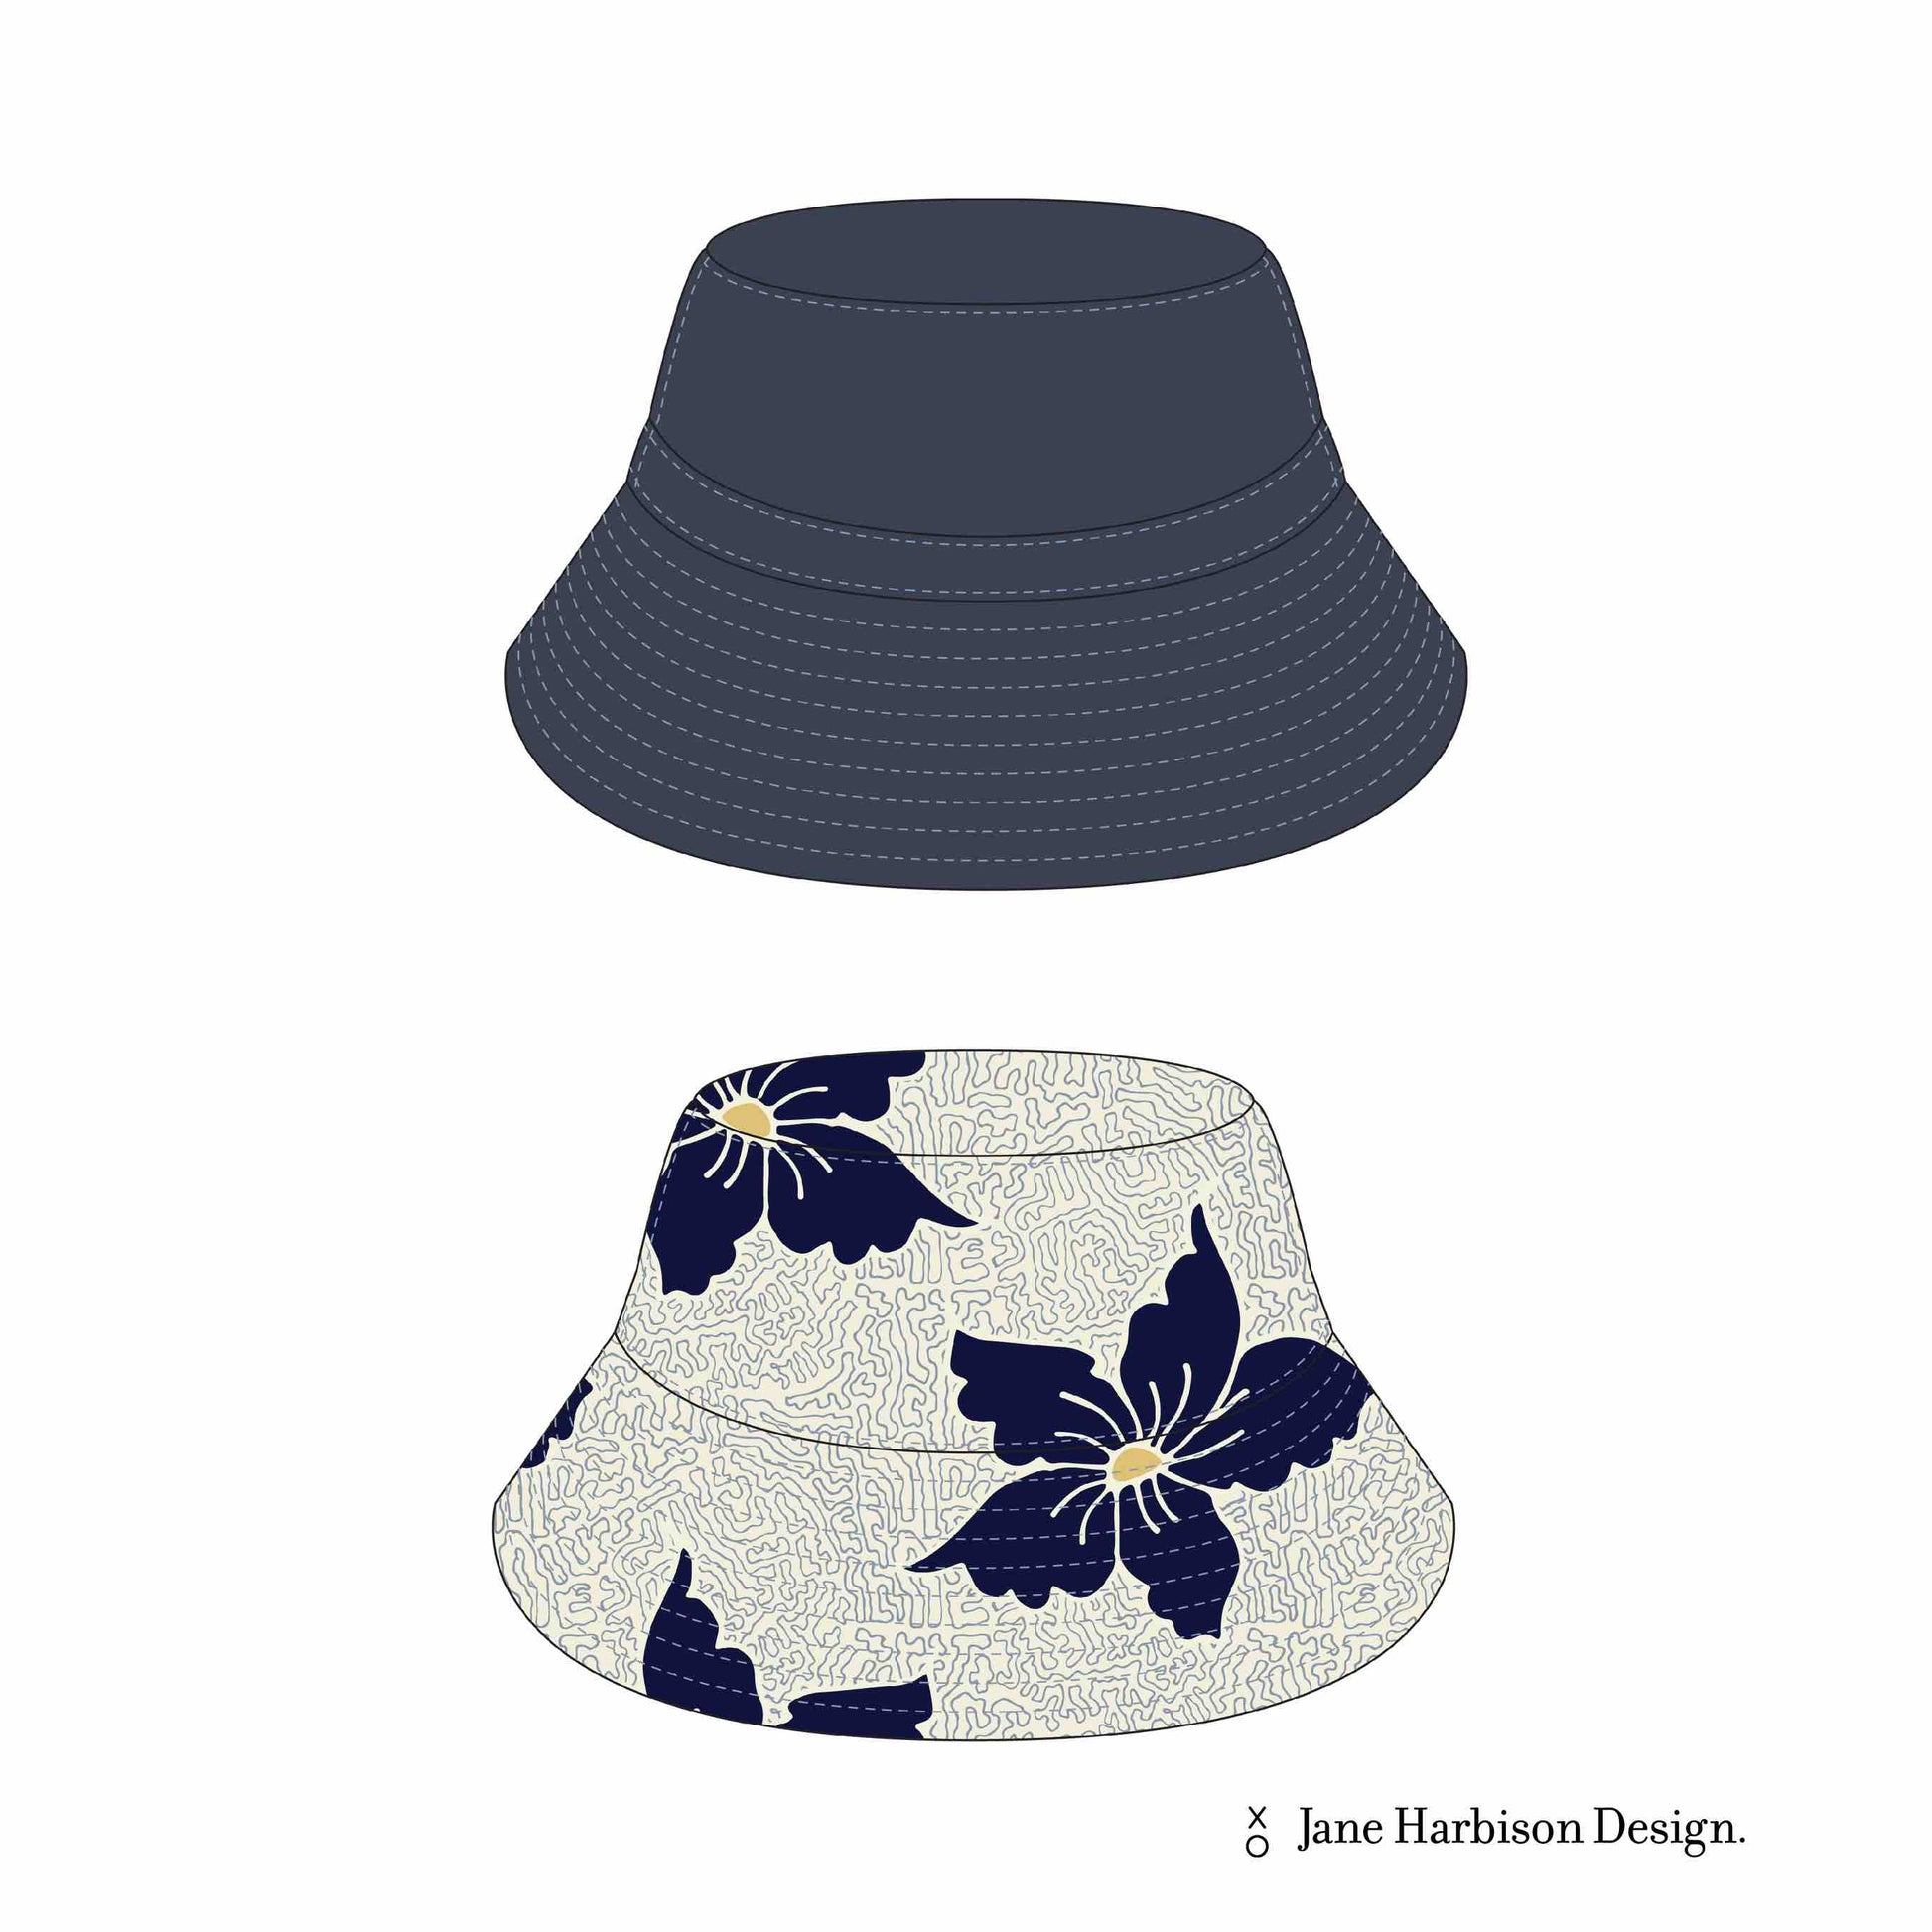 Reversible Bucket Hat Sewing Pattern and how to sew videos for boys and men in 7 sizes